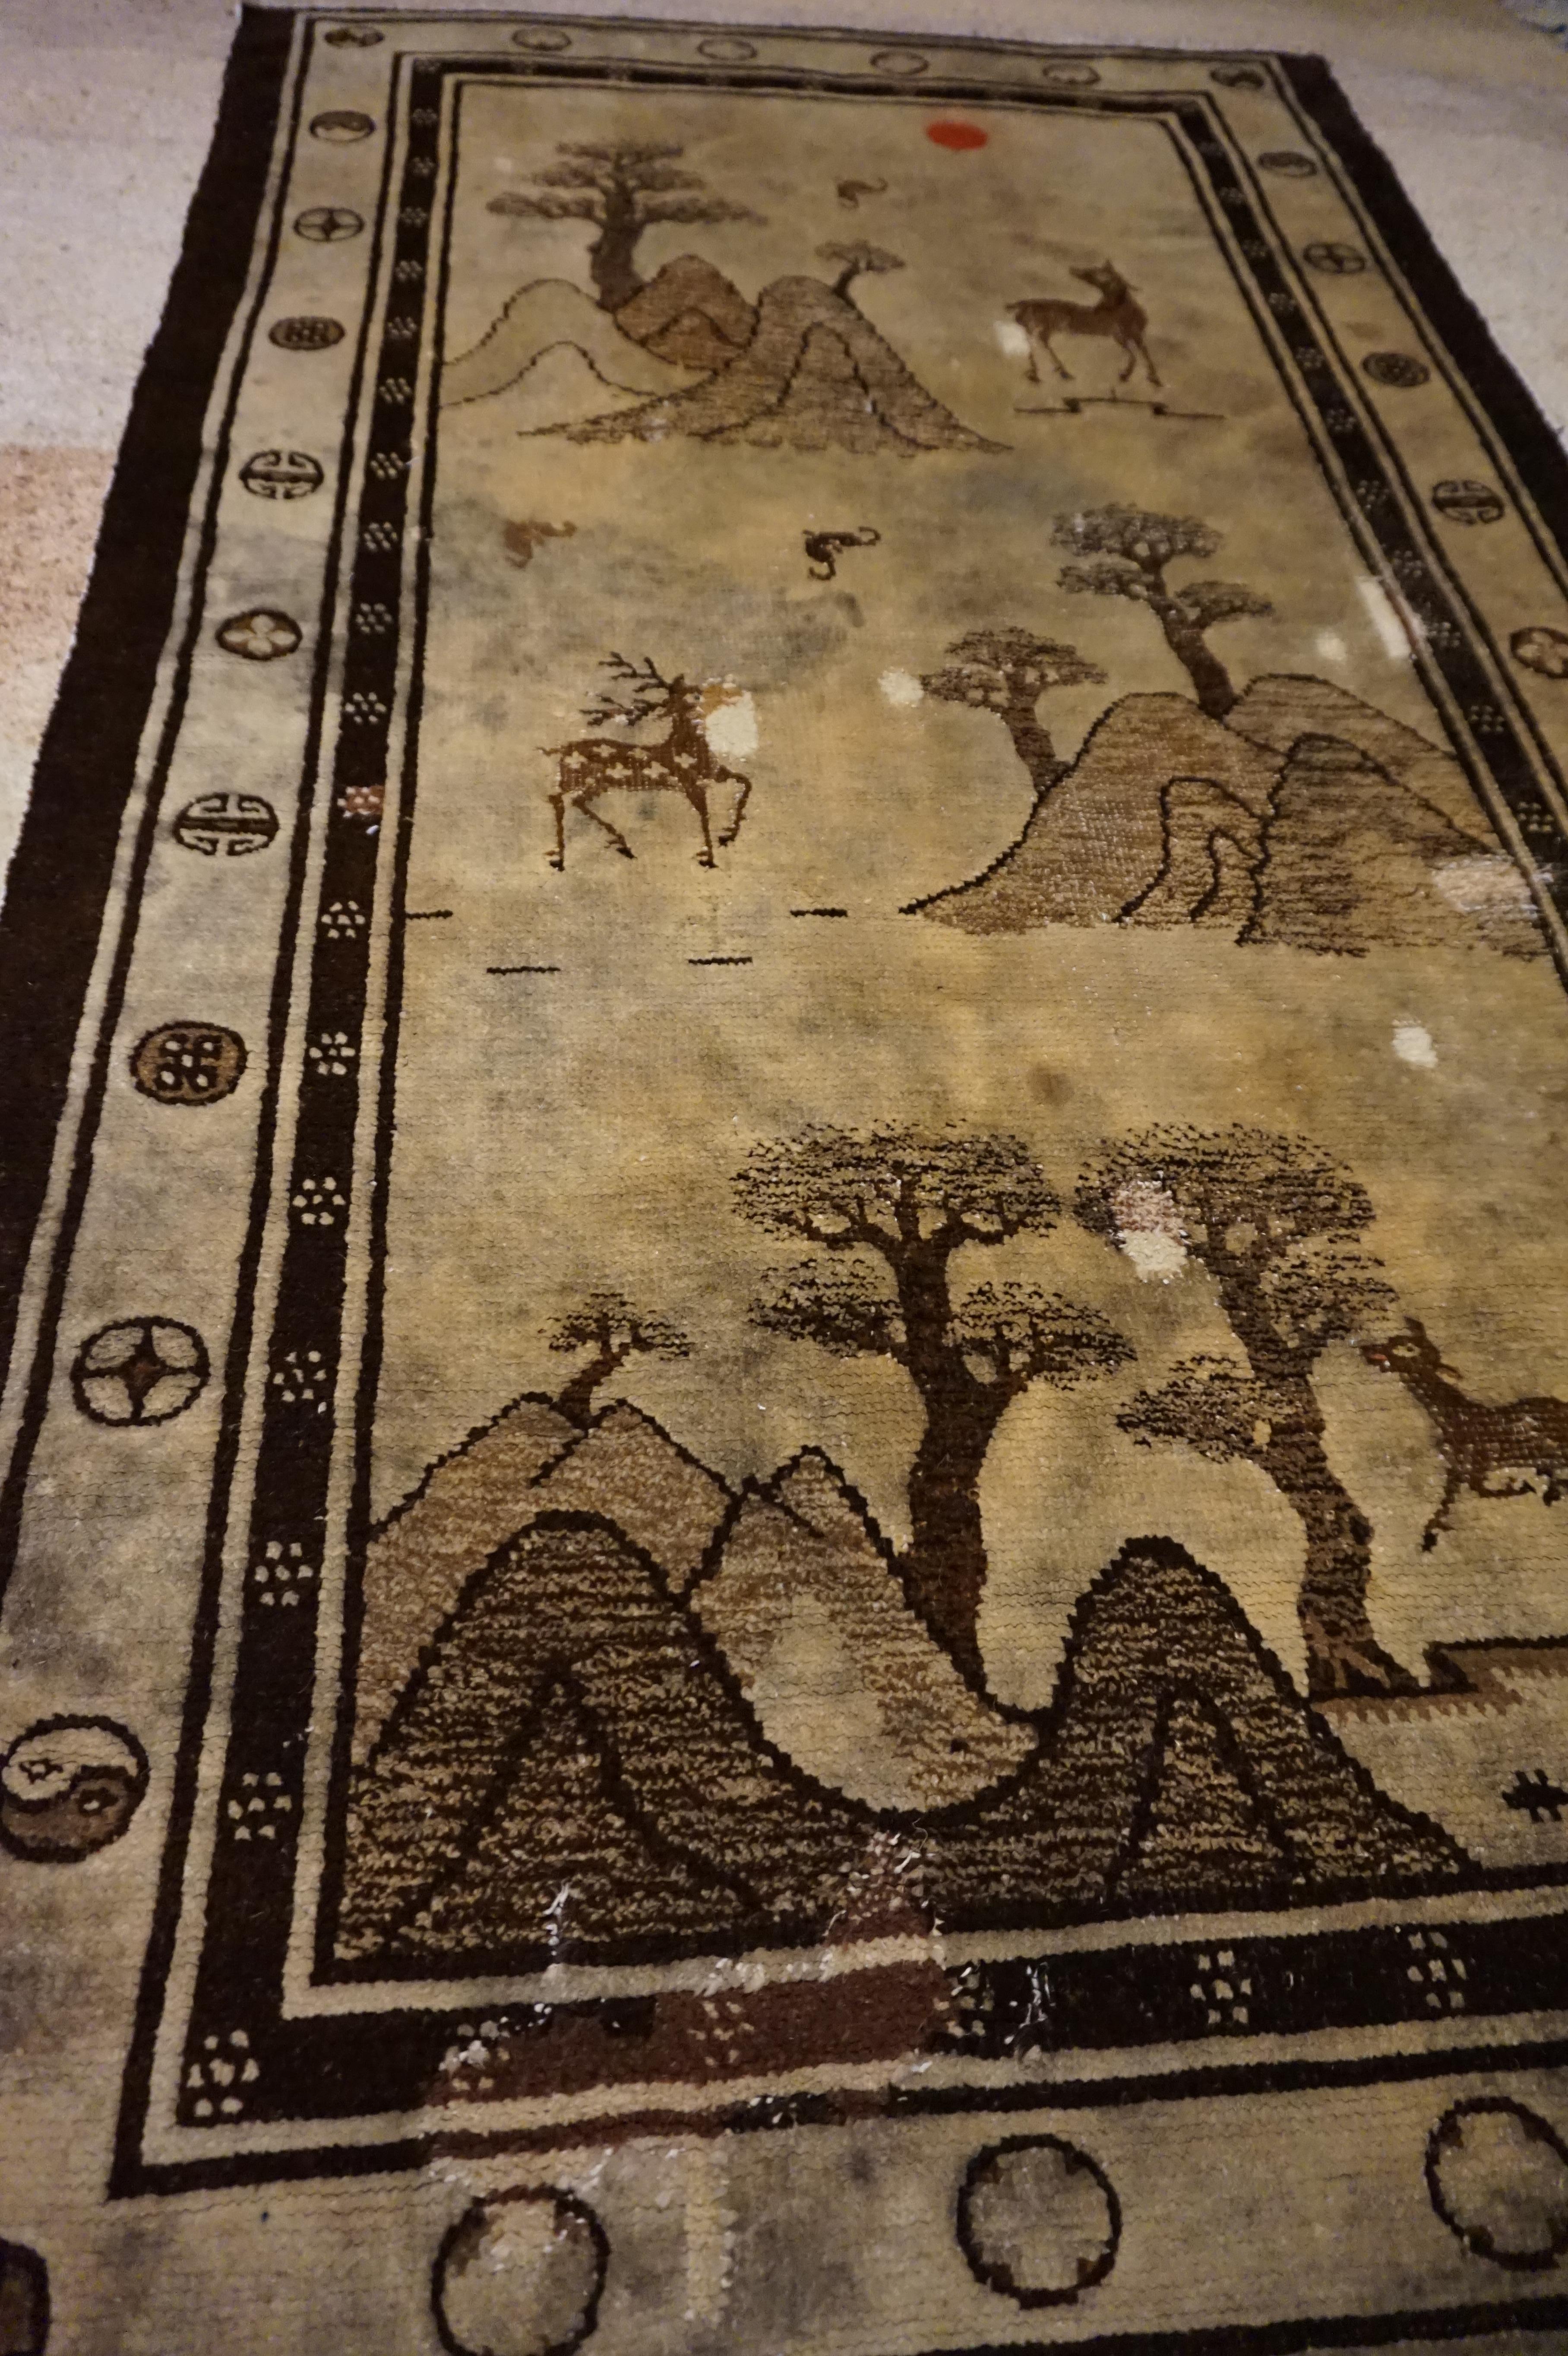 Rare hand knotted rug from Tibet depicting deer in various seasons. Some repair work and imperfections as visible in the rug (photos) but nonetheless a unique piece in sepia tones,

circa 1920s.